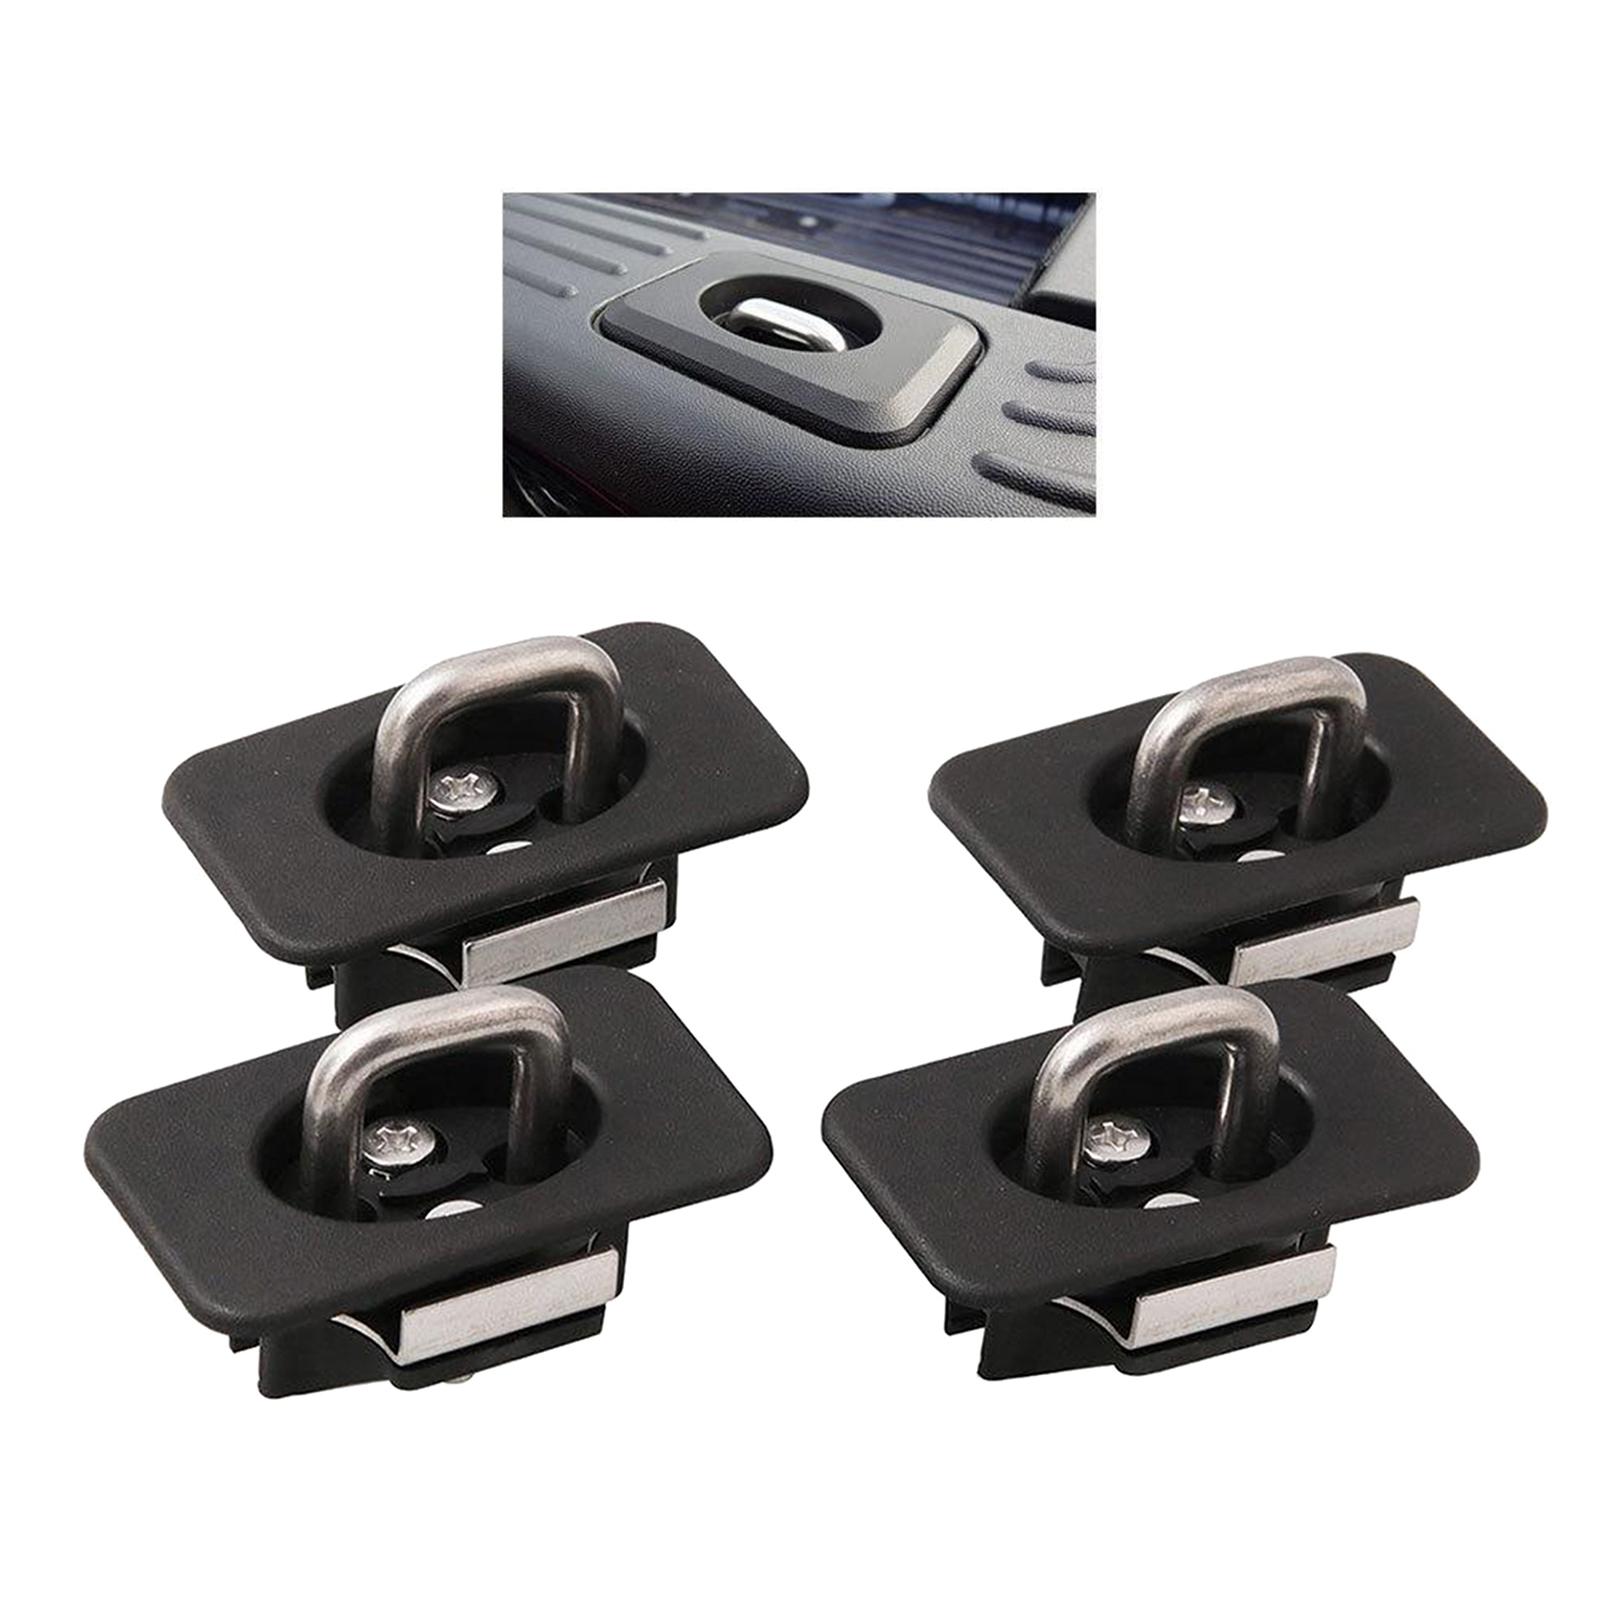 4Pcs Truck Tie Down Anchors Fit for Ford Raptor F-150 1998-2014 Car Part